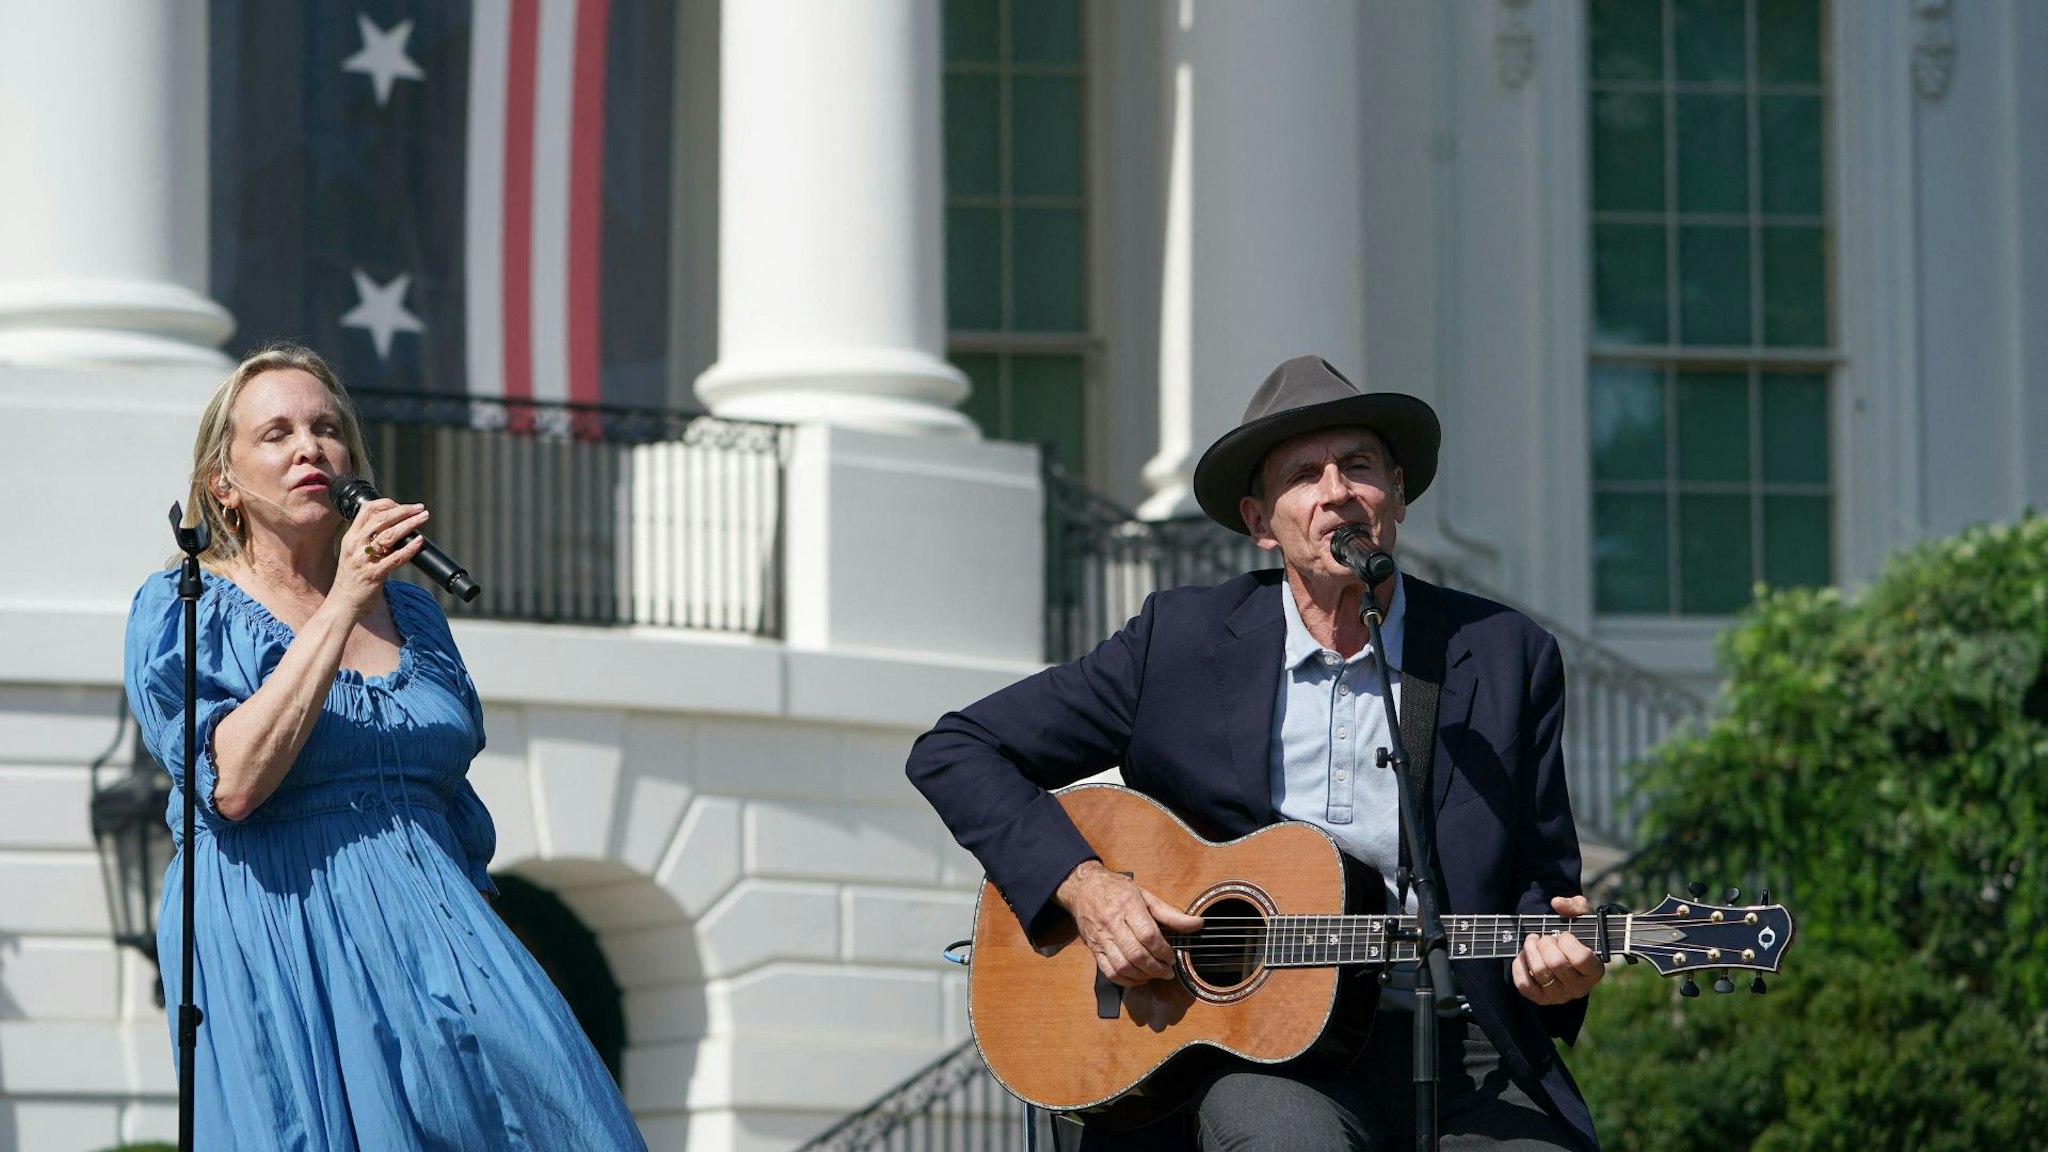 US singer James Taylor and wife Kim Taylor perform before US President Joe Biden speaks during an event to celebrate the passage of the Inflation Reduction Act of 2022 on the South Lawn of the White House in Washington, DC, on September 13, 2022.